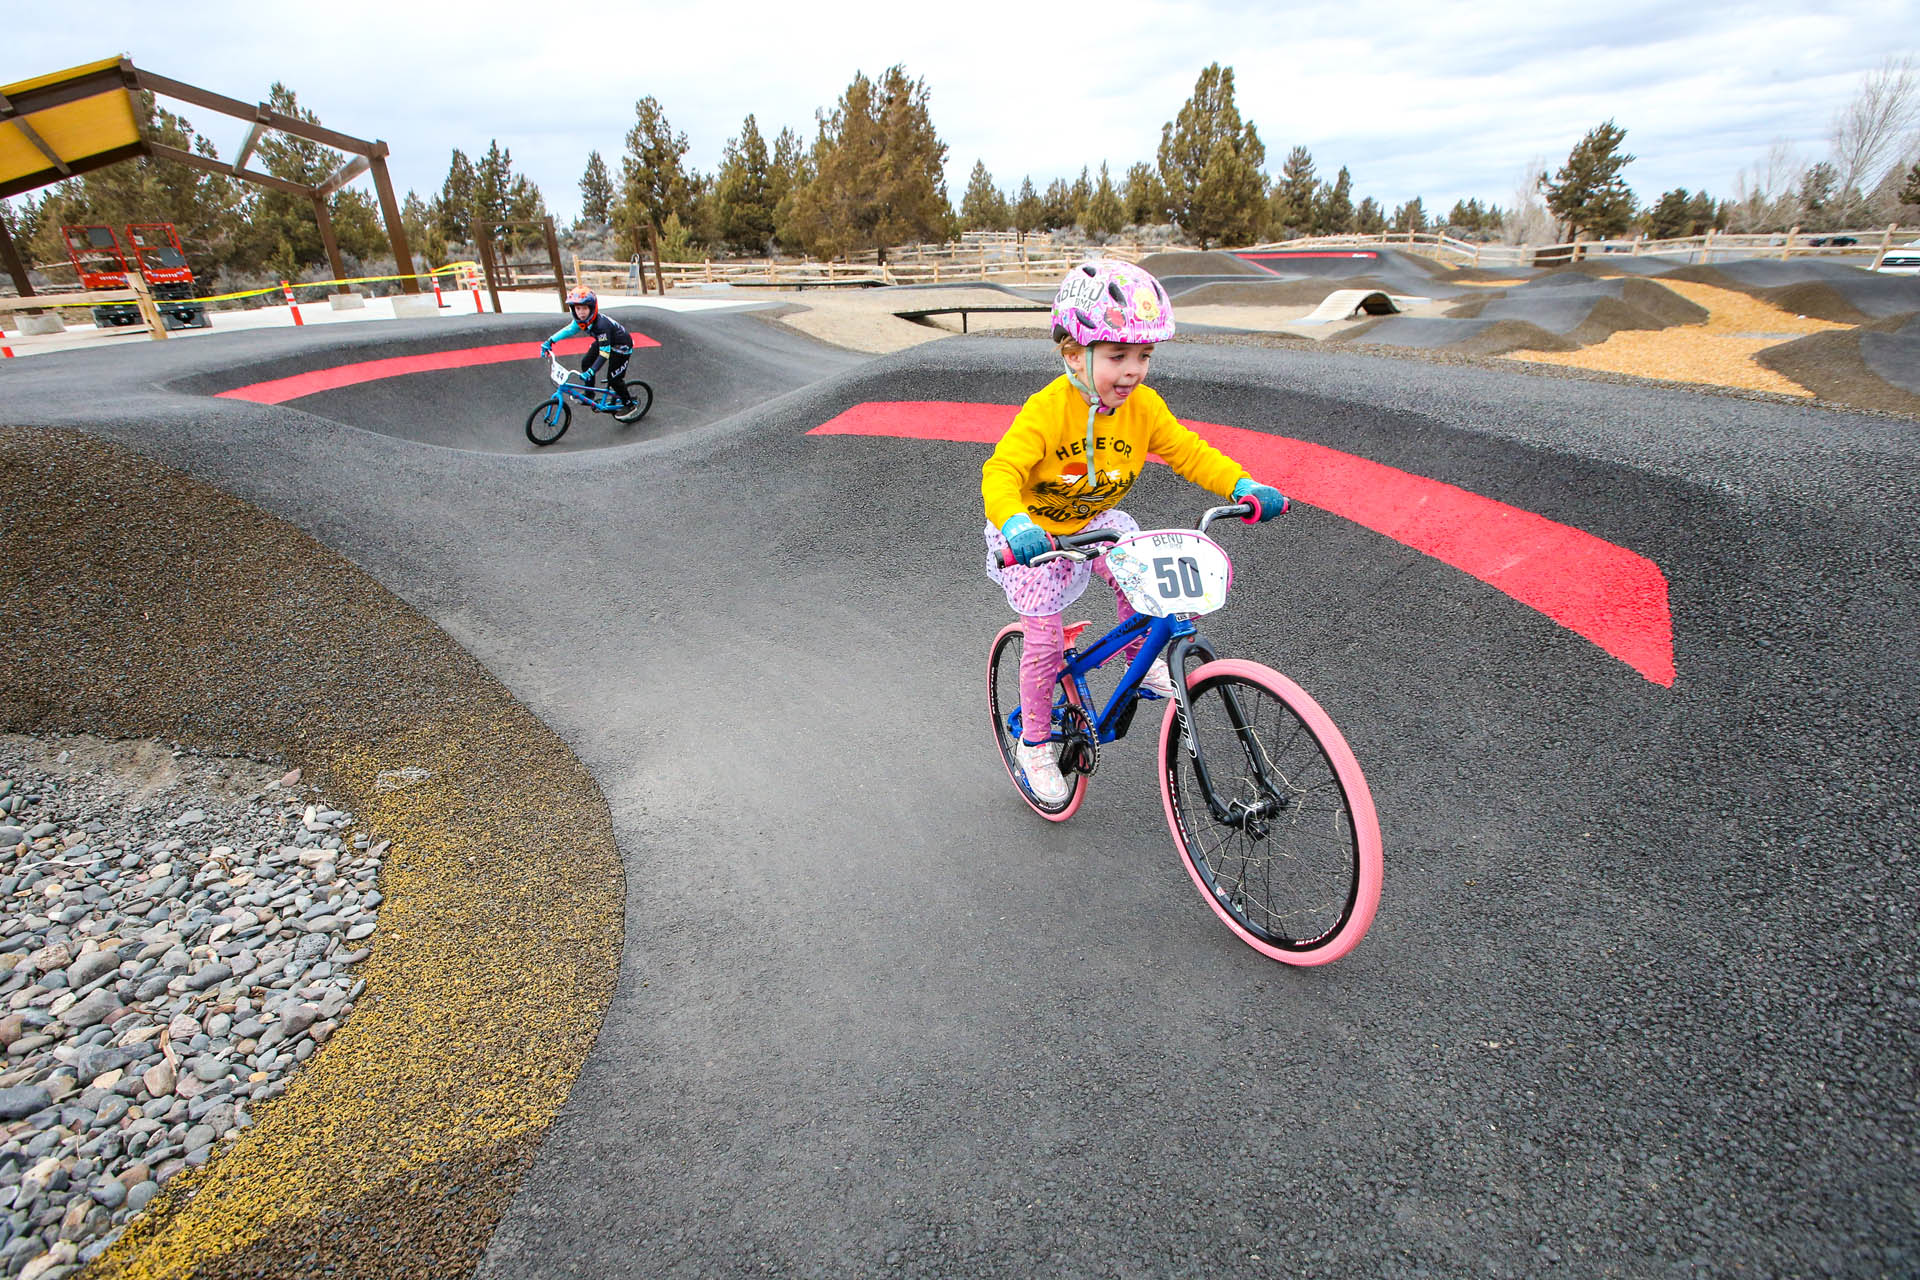 two young cyclists ride their BMX bikes on the pump track